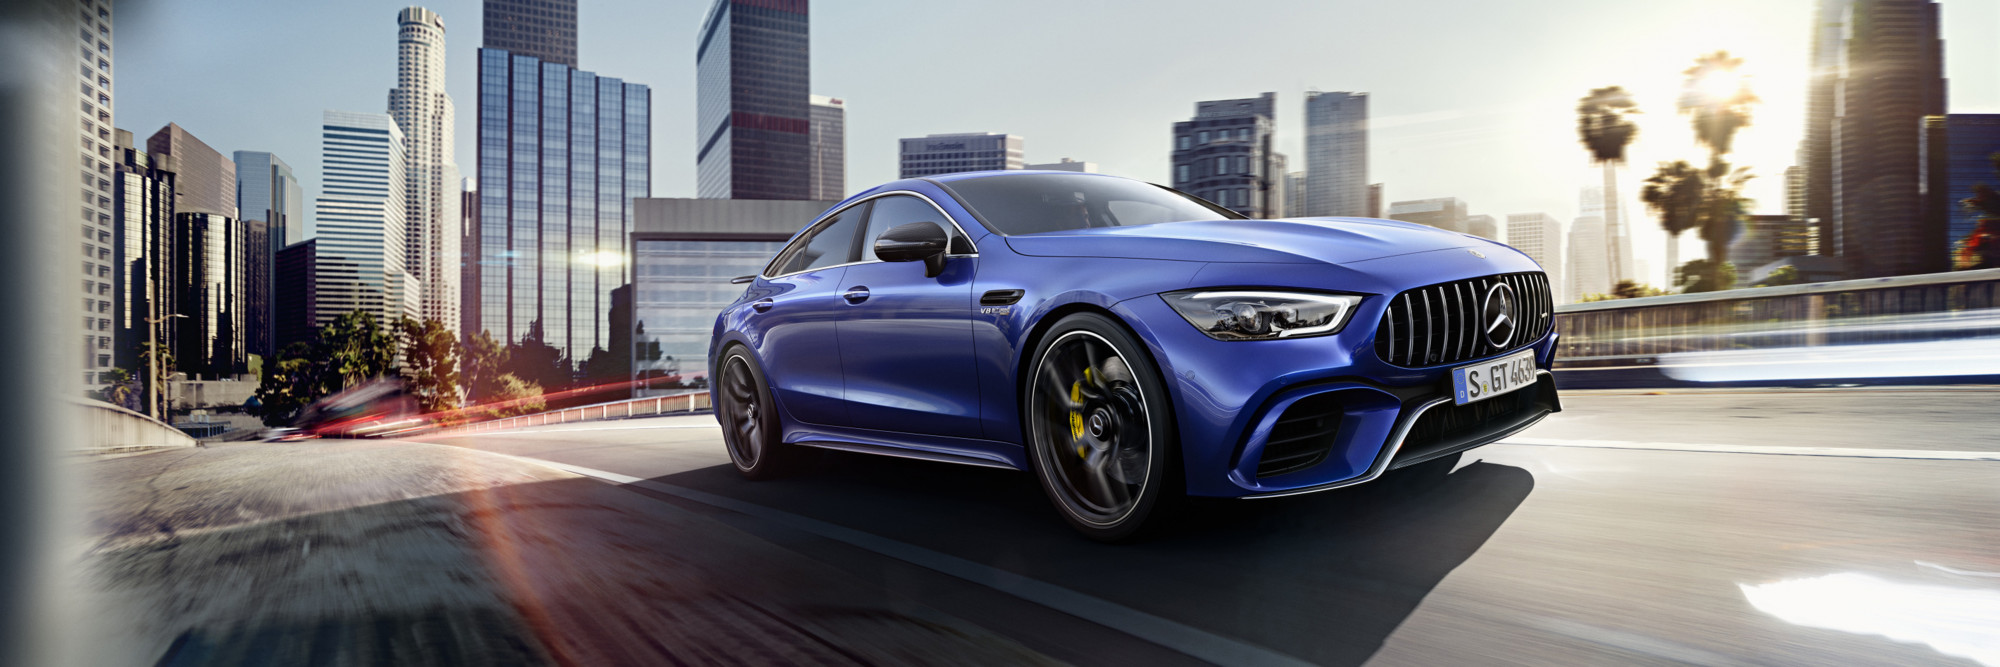 AMG GT 4D Coupe 1 acties 4000x1333